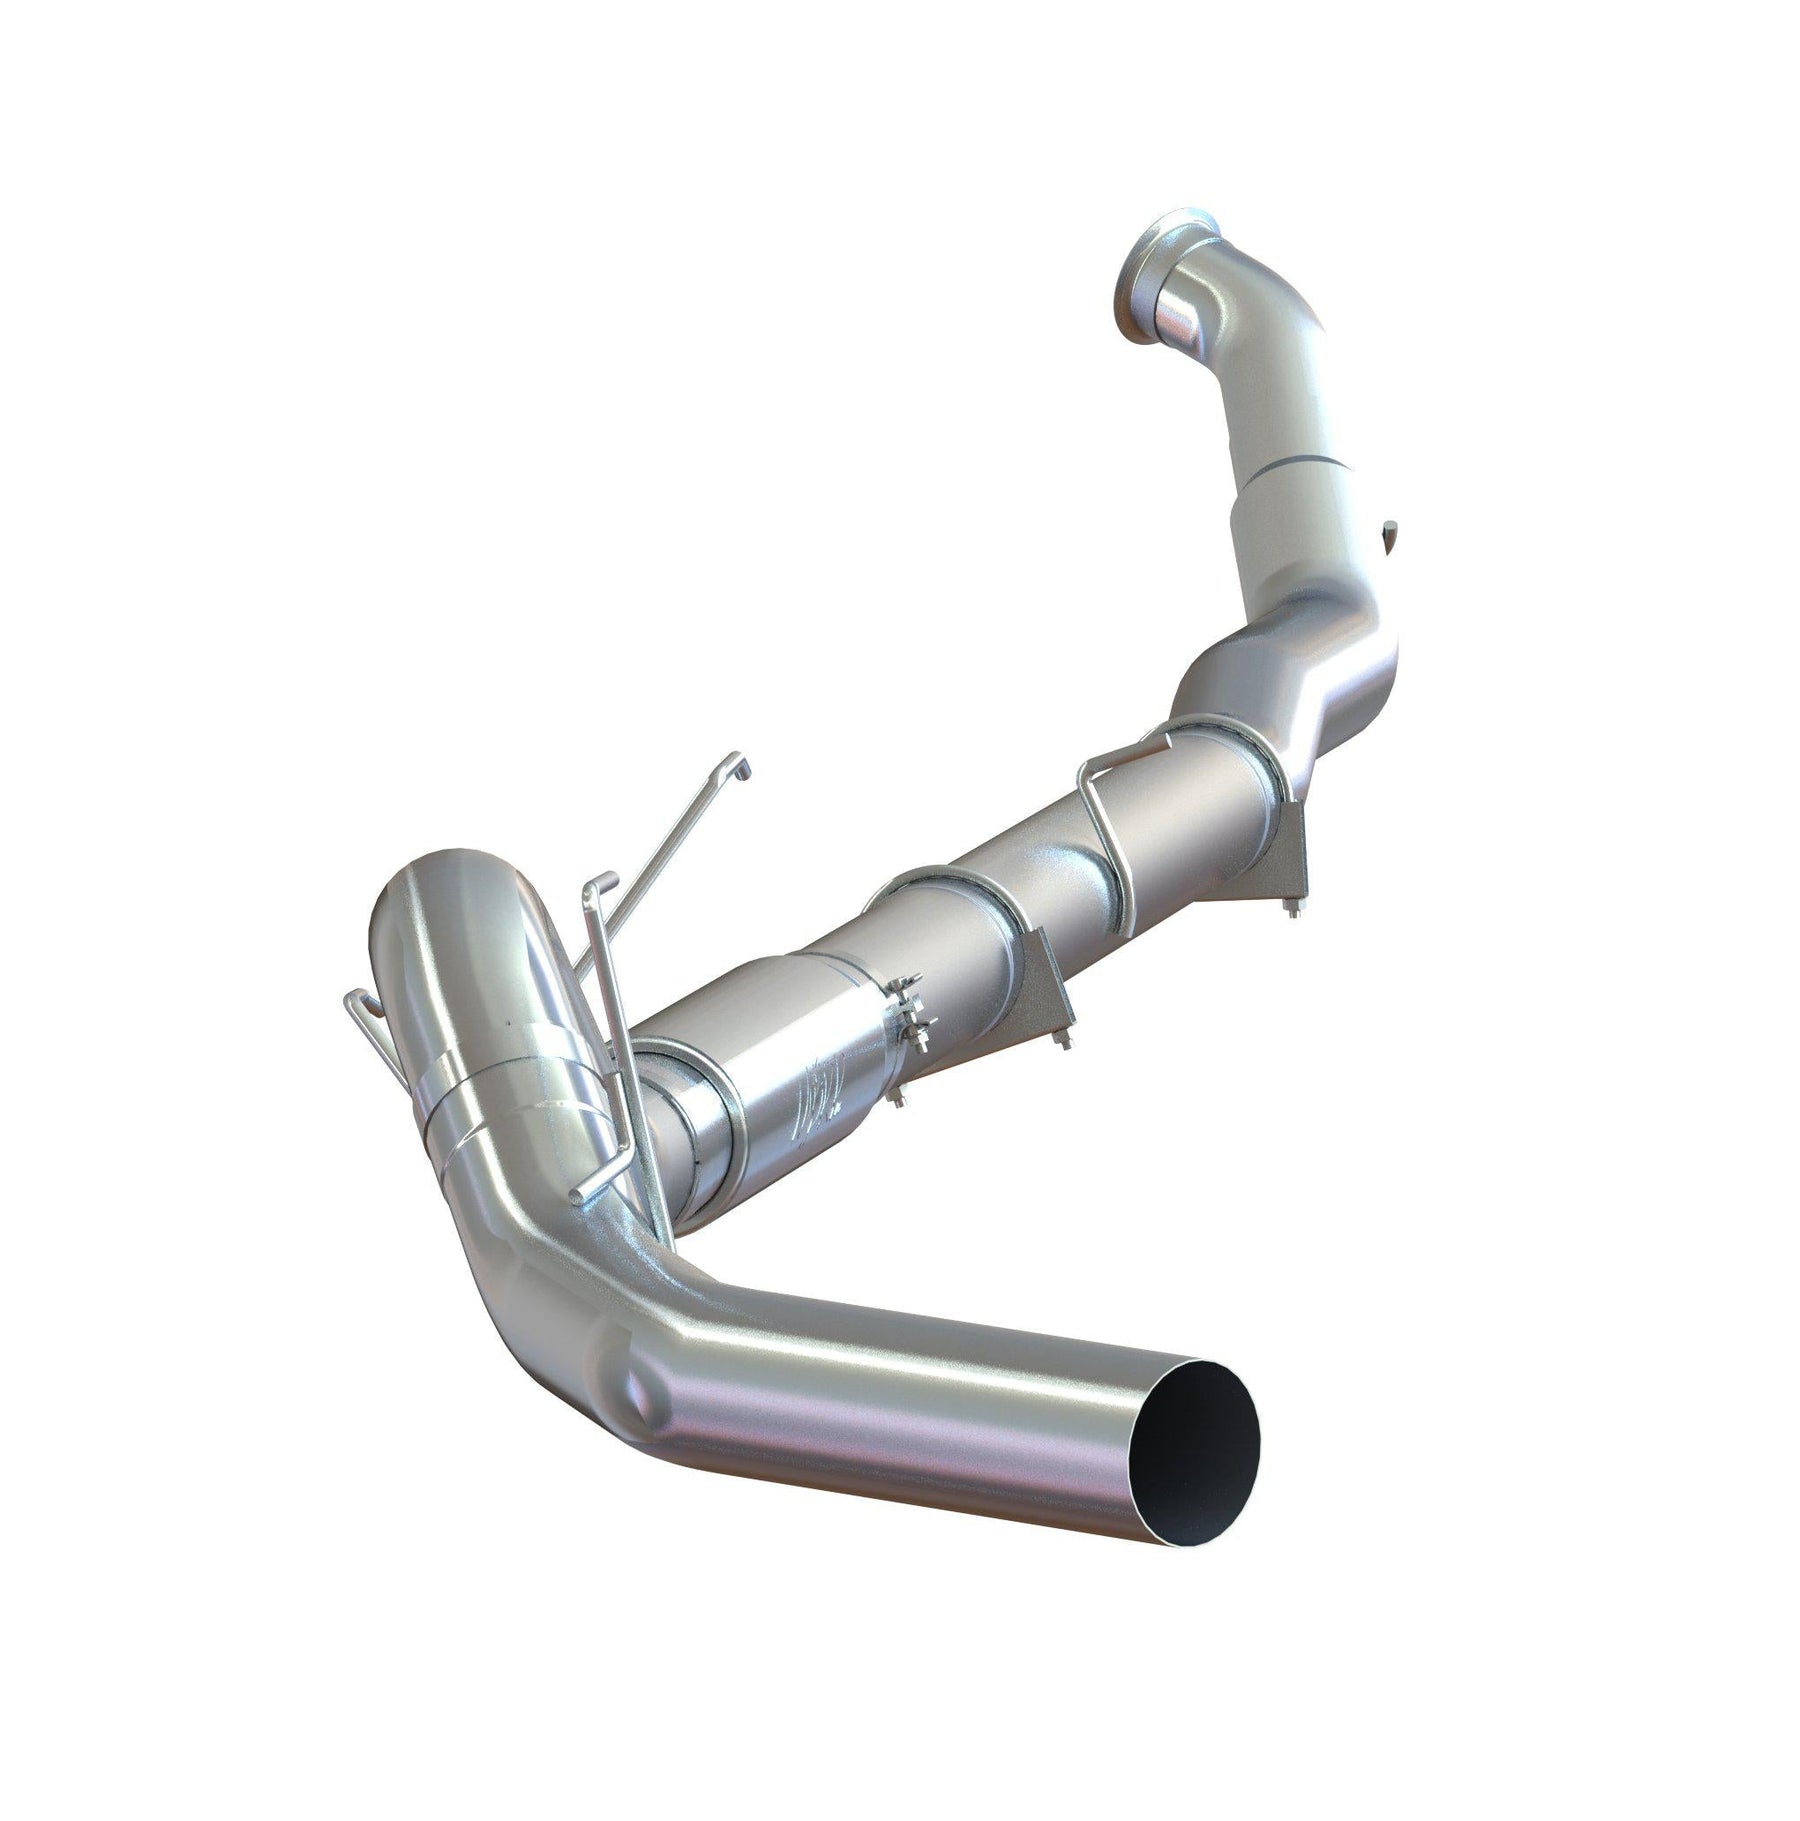 2010-2012 Cummins 5" Turbo Back Exhaust w/ Muffler (C6146P)-Turbo Back Exhaust System-P1 Performance Products-C6146P-Dirty Diesel Customs